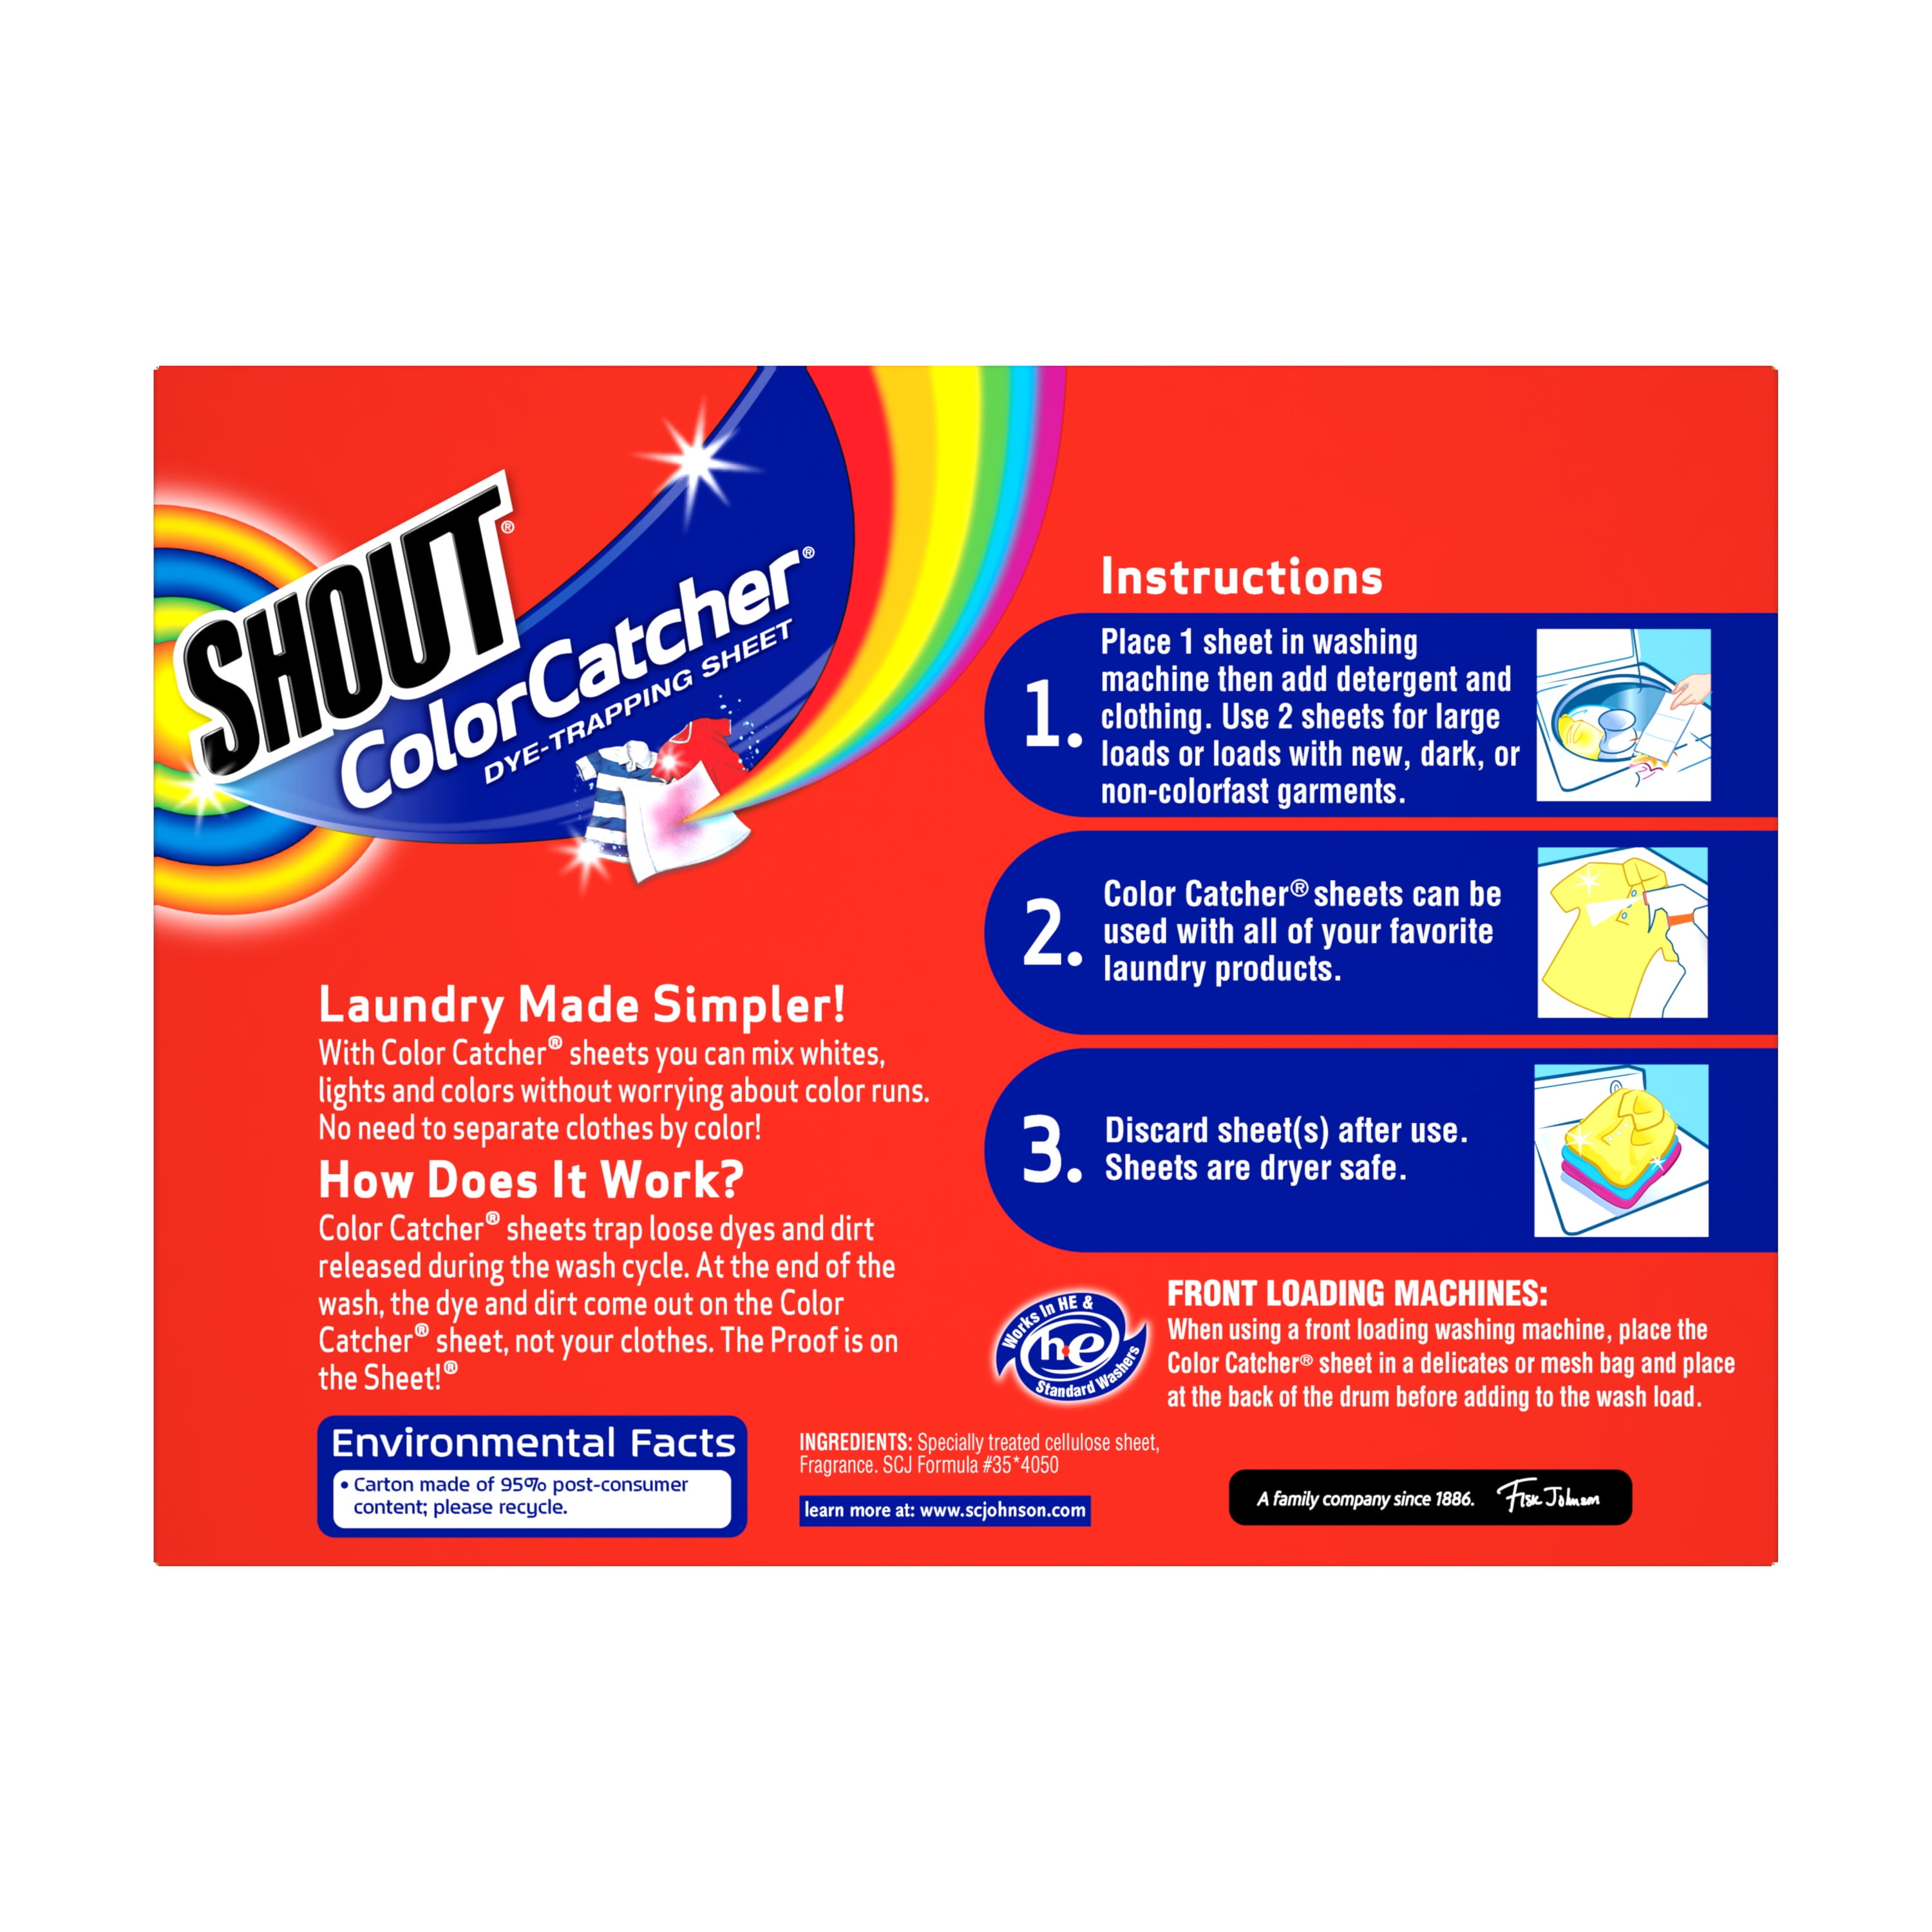 Shout Color Catcher, Dye-Trapping Sheets, 24 Sheets 